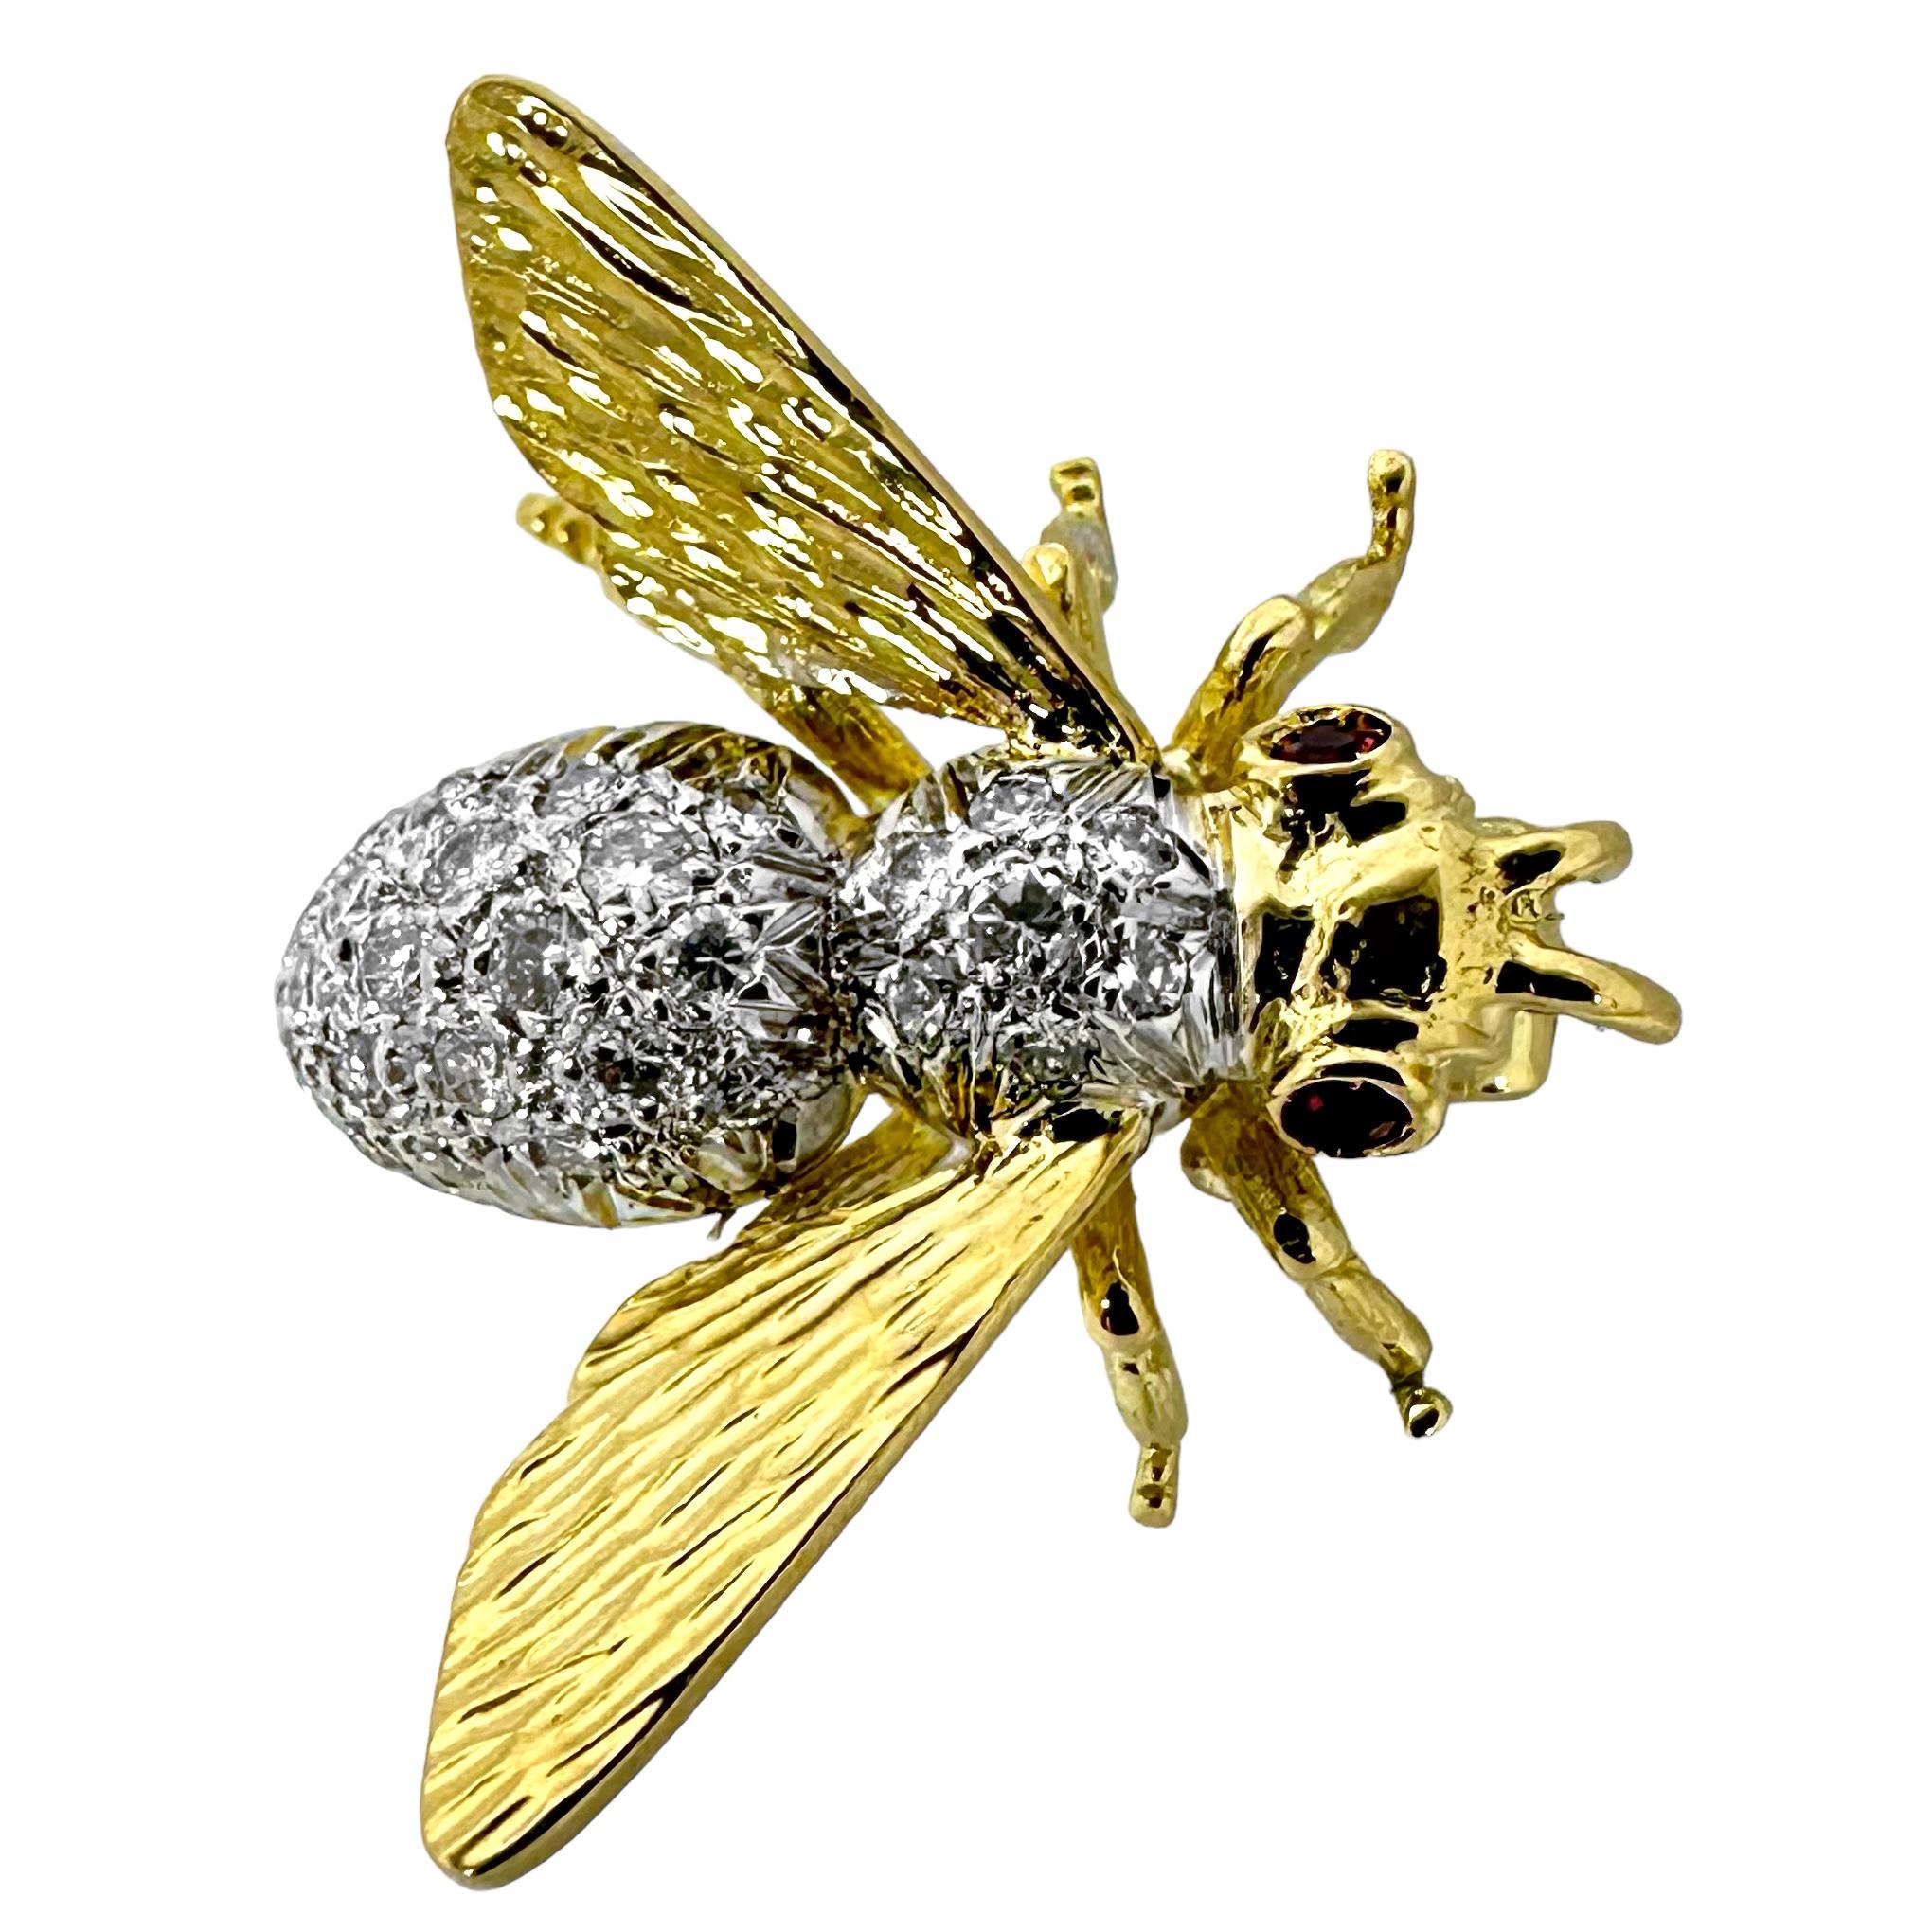 This fanciful Mid-20th Century Italian creation depicts a beautifully proportioned honey bee with wings spread, ready for flight. The thorax and abdomen are heavily diamond encrusted, and eyes are sultry antique cut natural rubies. Total approximate